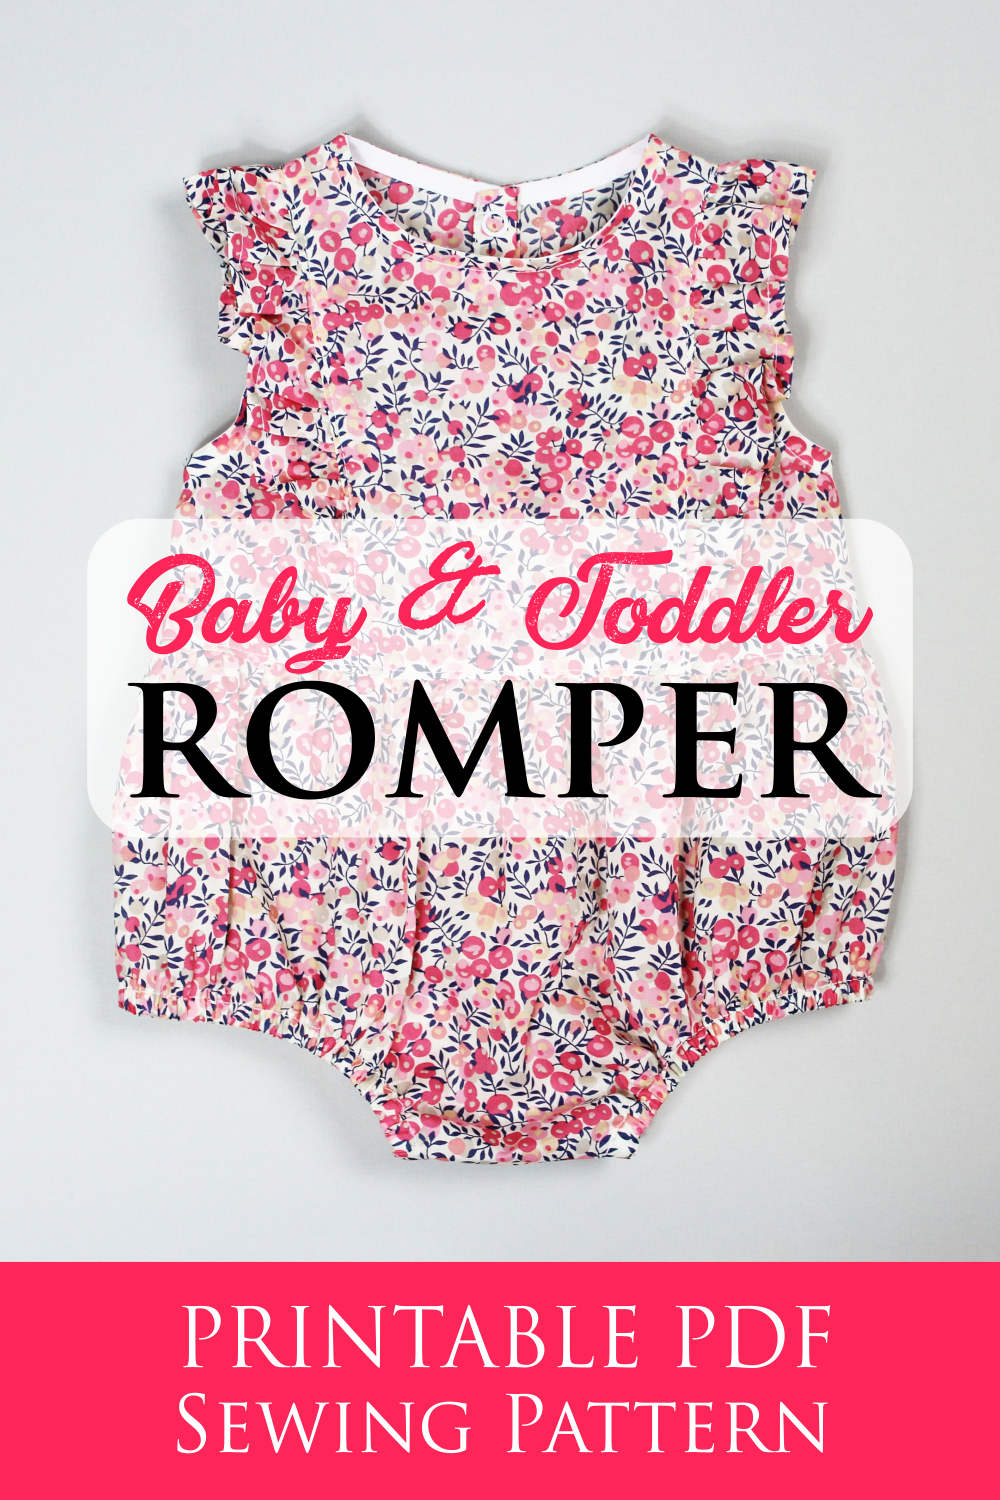 Baby Romper PDF Sewing Pattern- Toddler Pattern, girl romper pattern, summer romper, baby clothing, toddler pattern, trendy baby -   18 fabric crafts For Children diy baby
 ideas